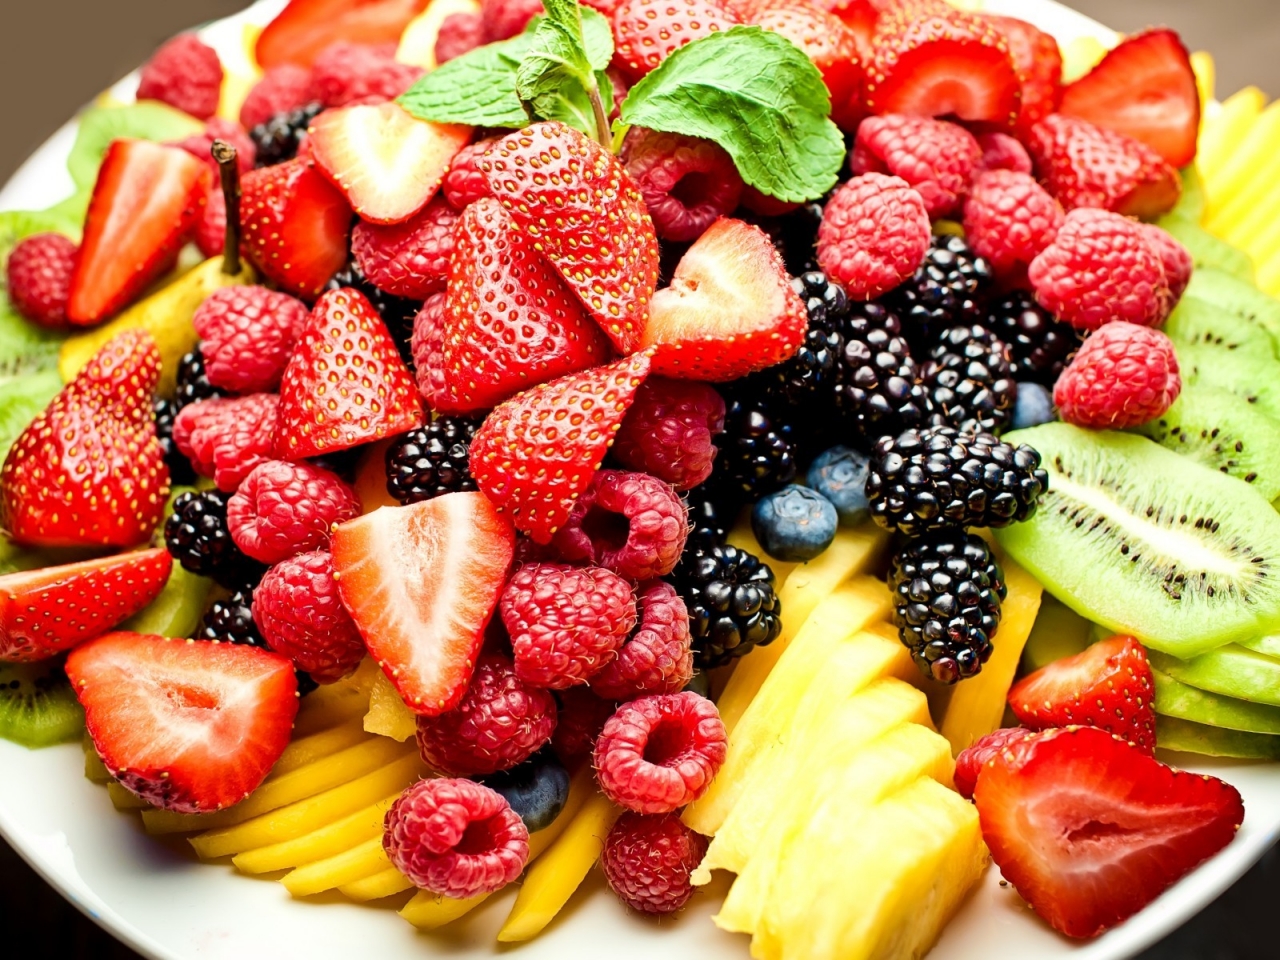 Fruits Plate for 1280 x 960 resolution